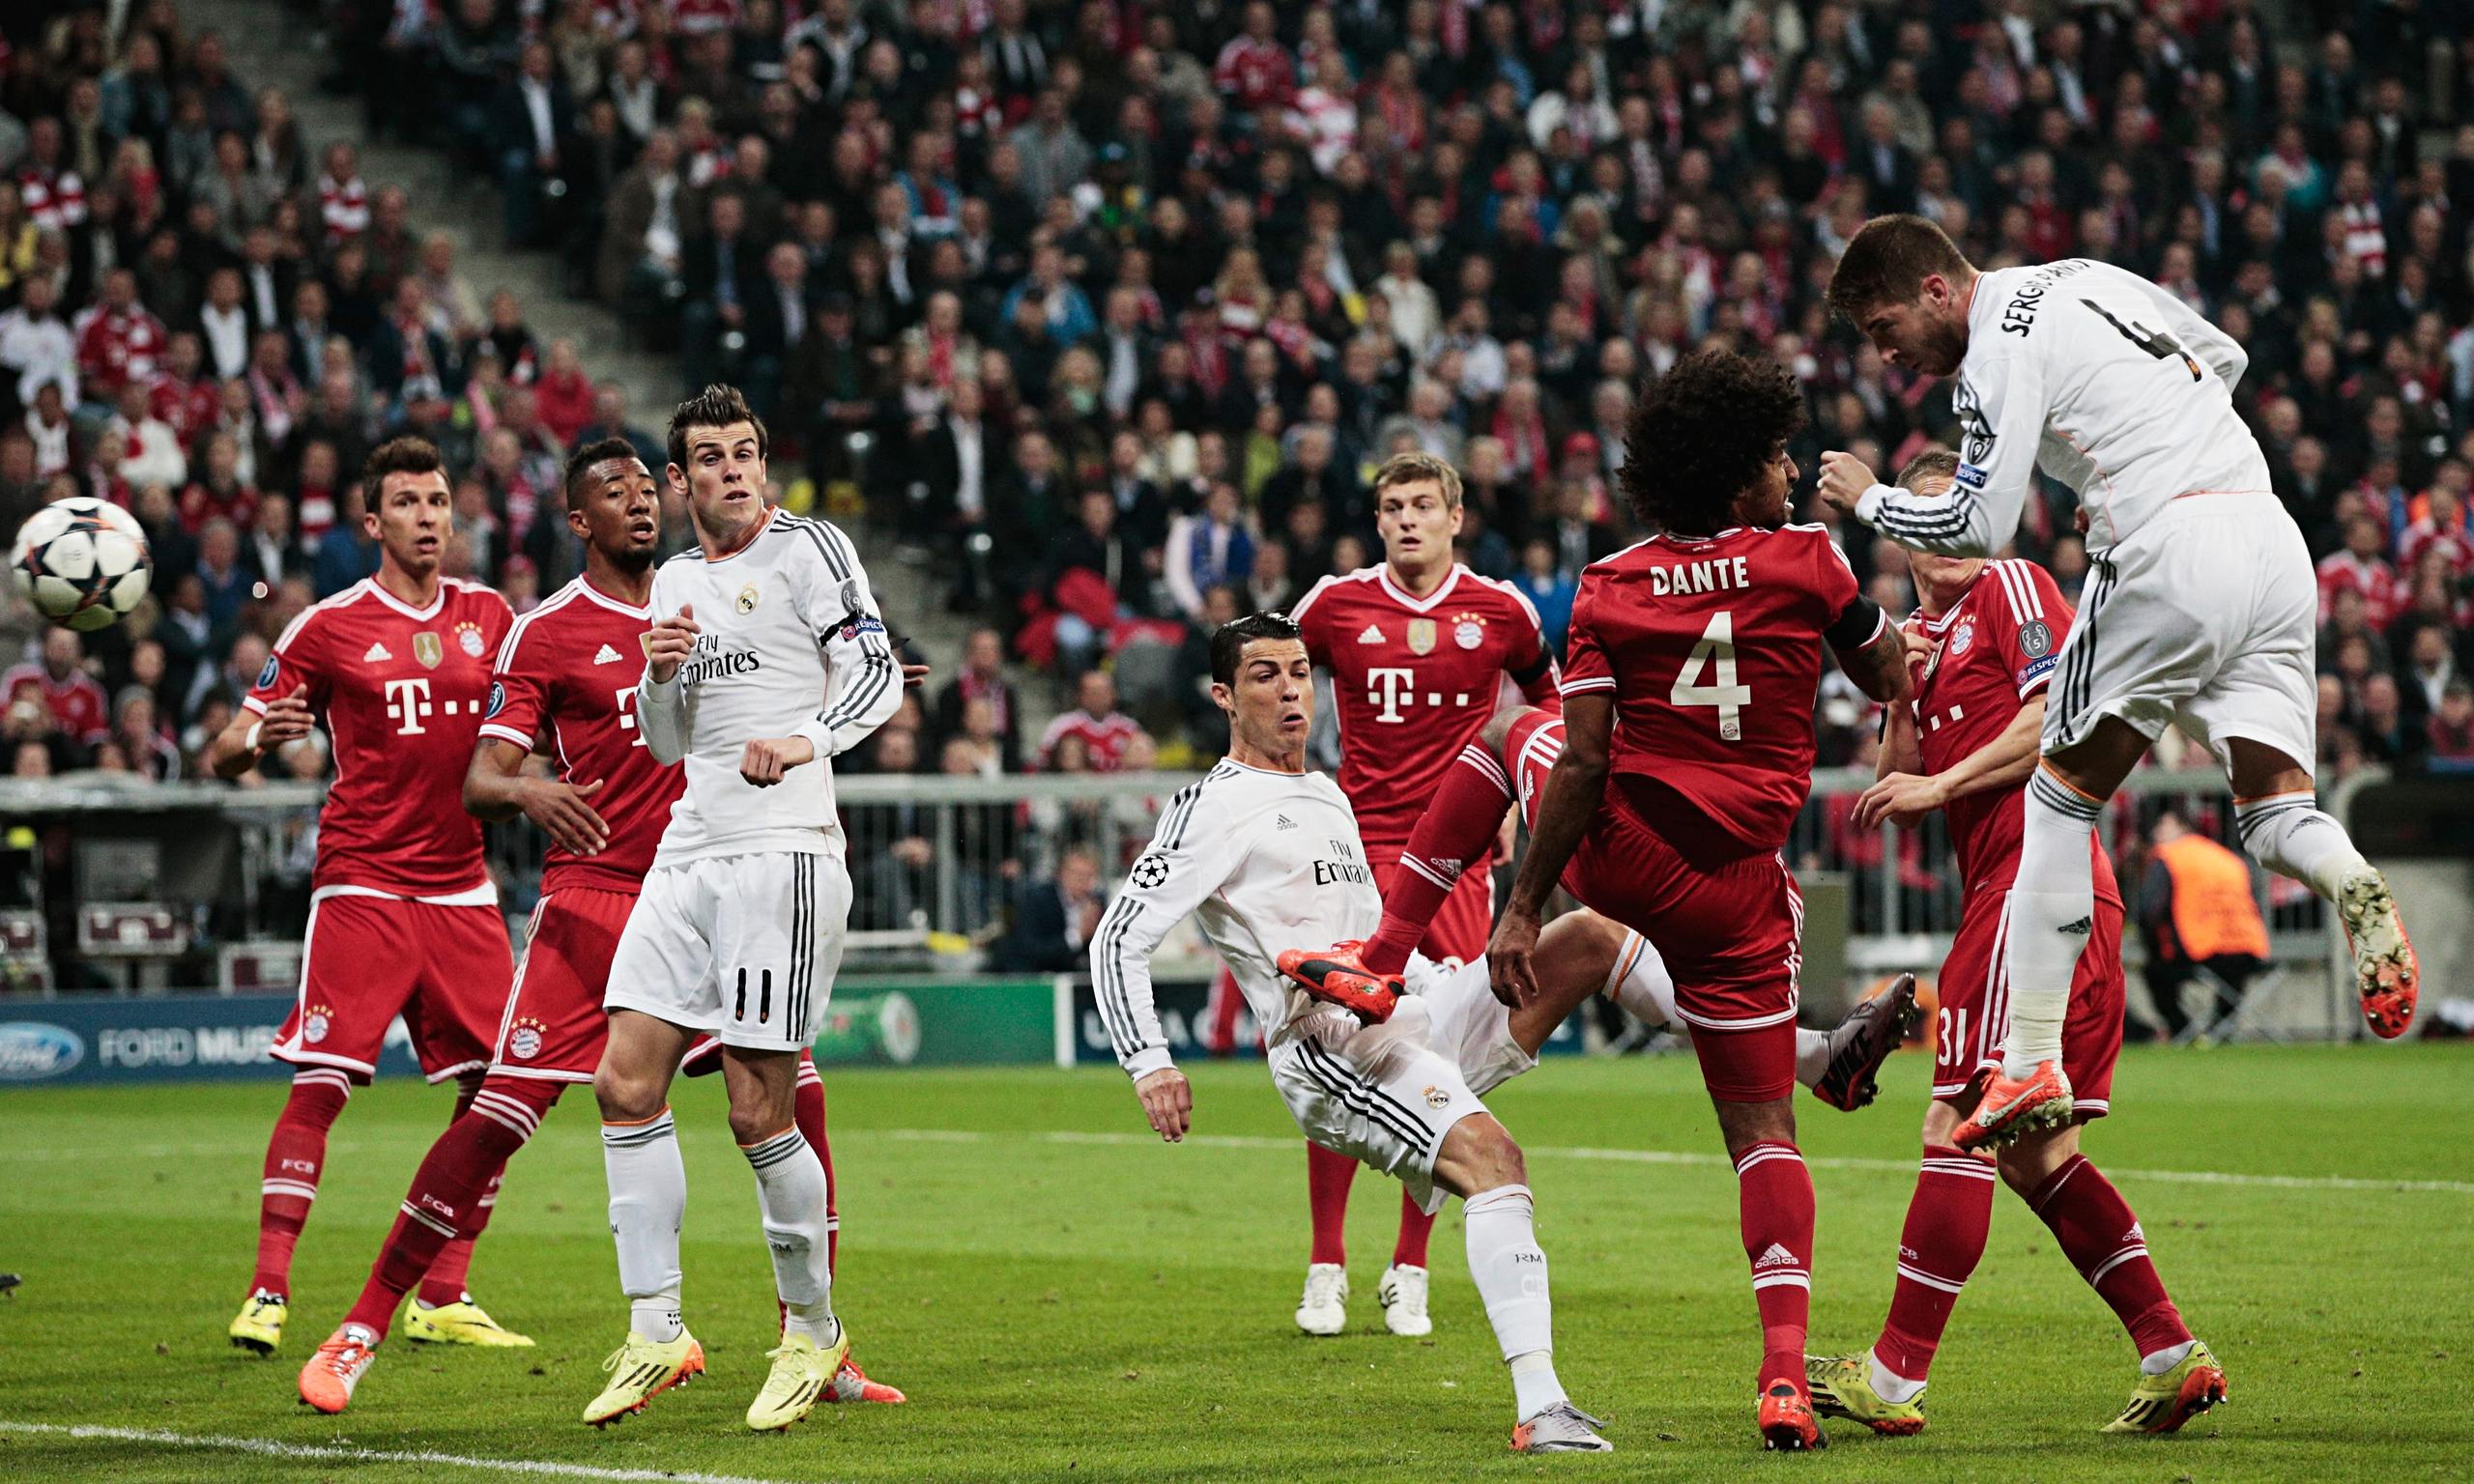  A header attempt by Real Madrid's Sergio Ramos during the second leg of the 2013/14 UEFA Champions League semi-final against Bayern Munich at the Allianz Arena in Munich, Germany.